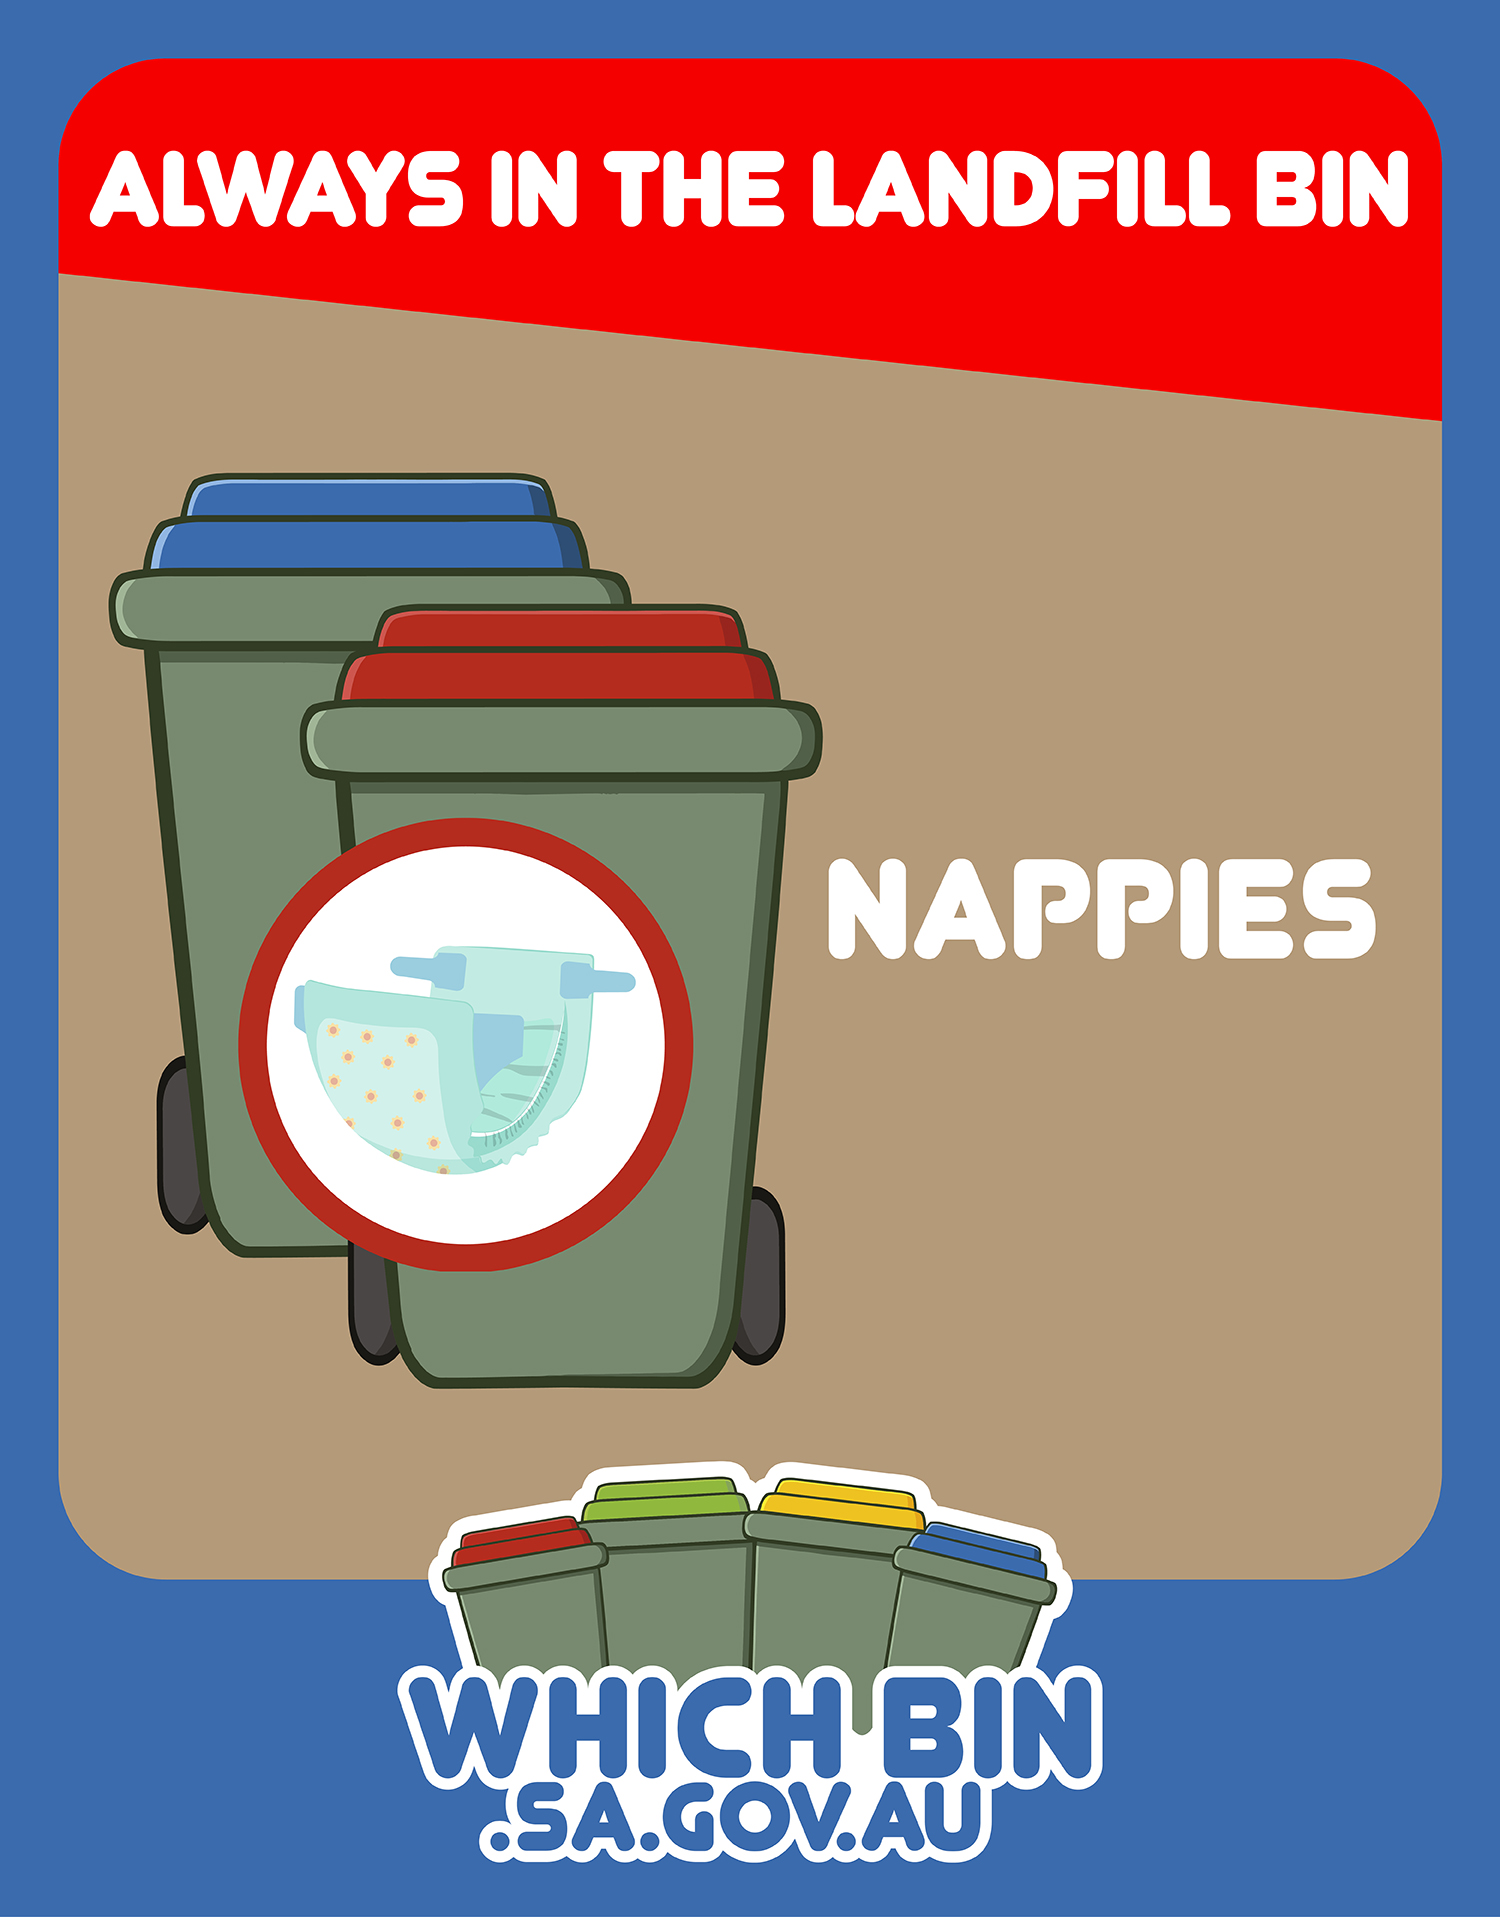 Always in the landfill bin: nappies